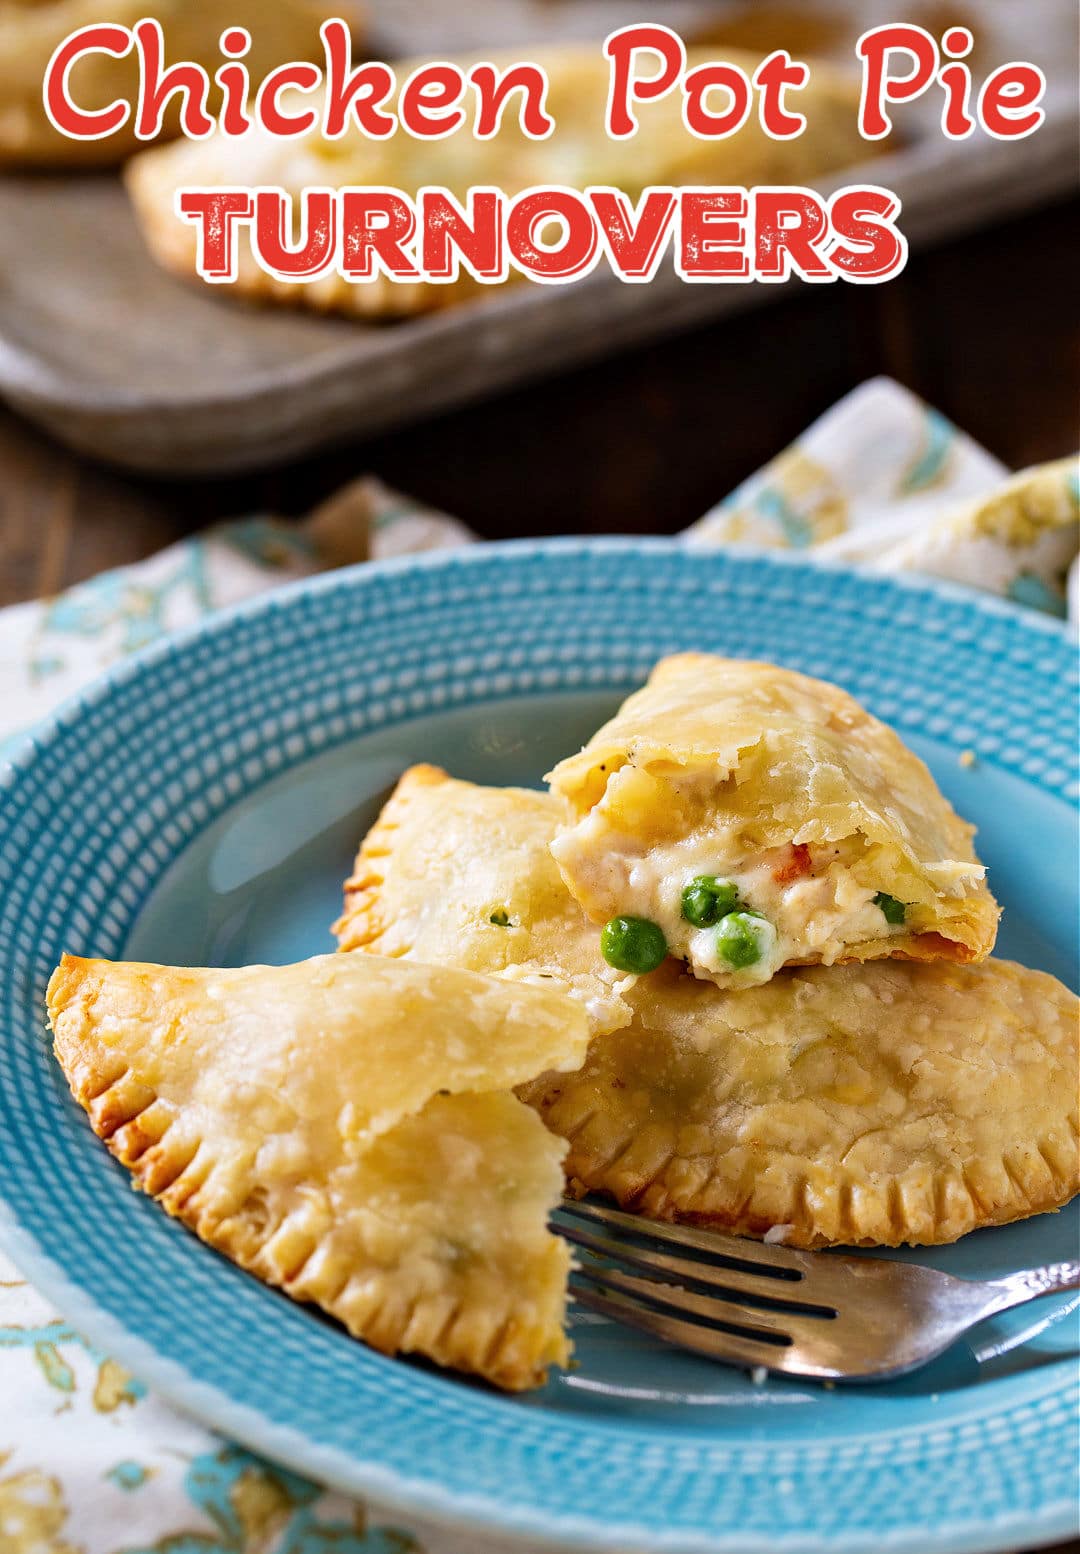 Chicken Pot Pie Turnovers on a plate.